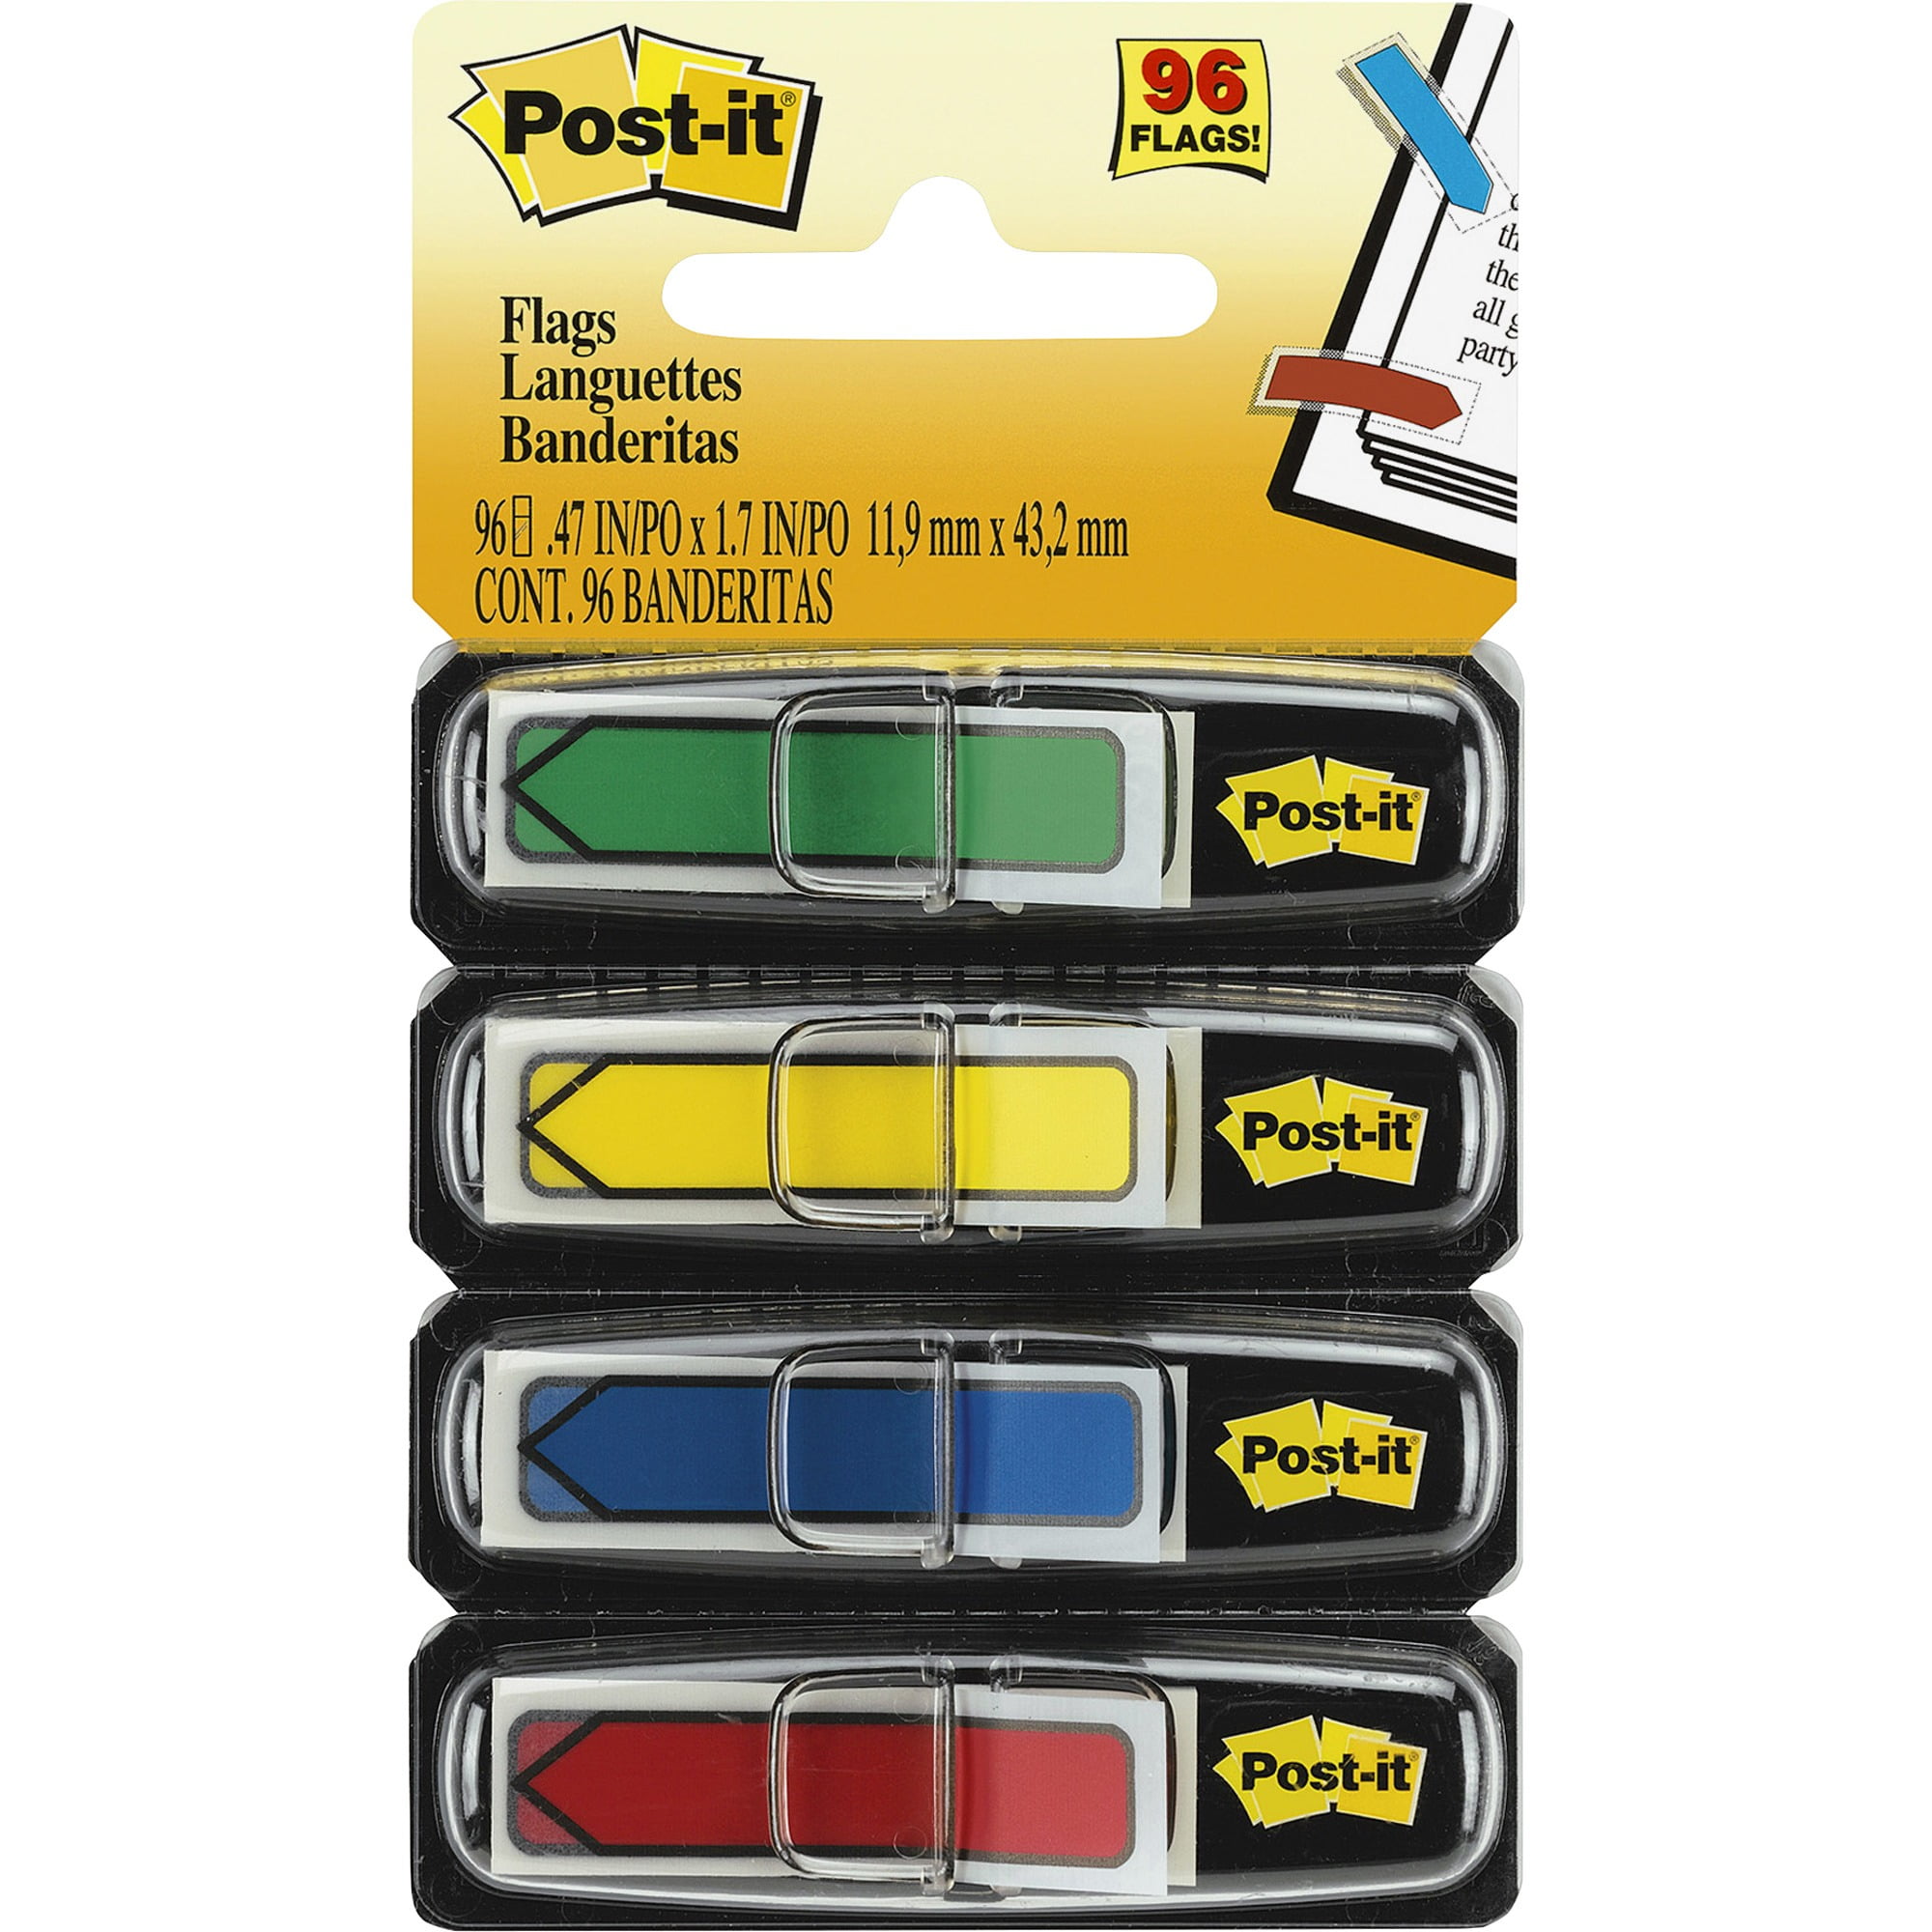 684-ARR3 Wide Post-it Arrow Flags 24//Dispenser 4 Dispensers//Pack, Assorted Primary Colors.47 in 5